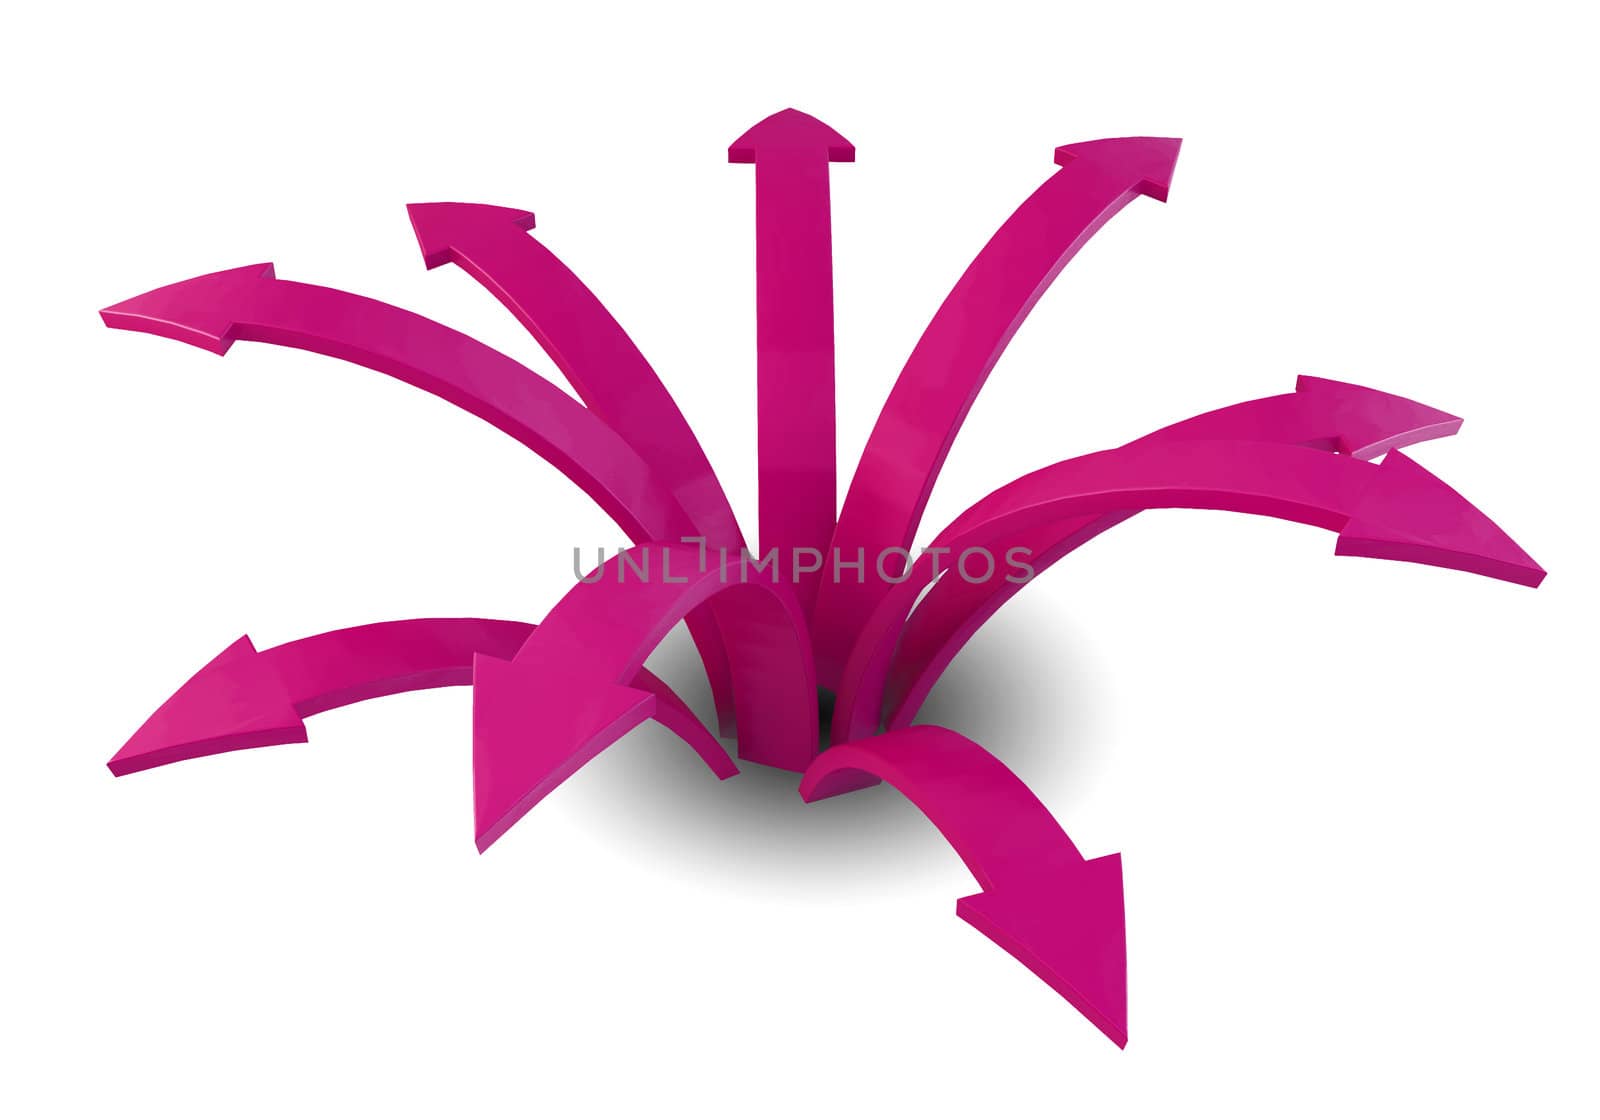 Pink arrows on white background